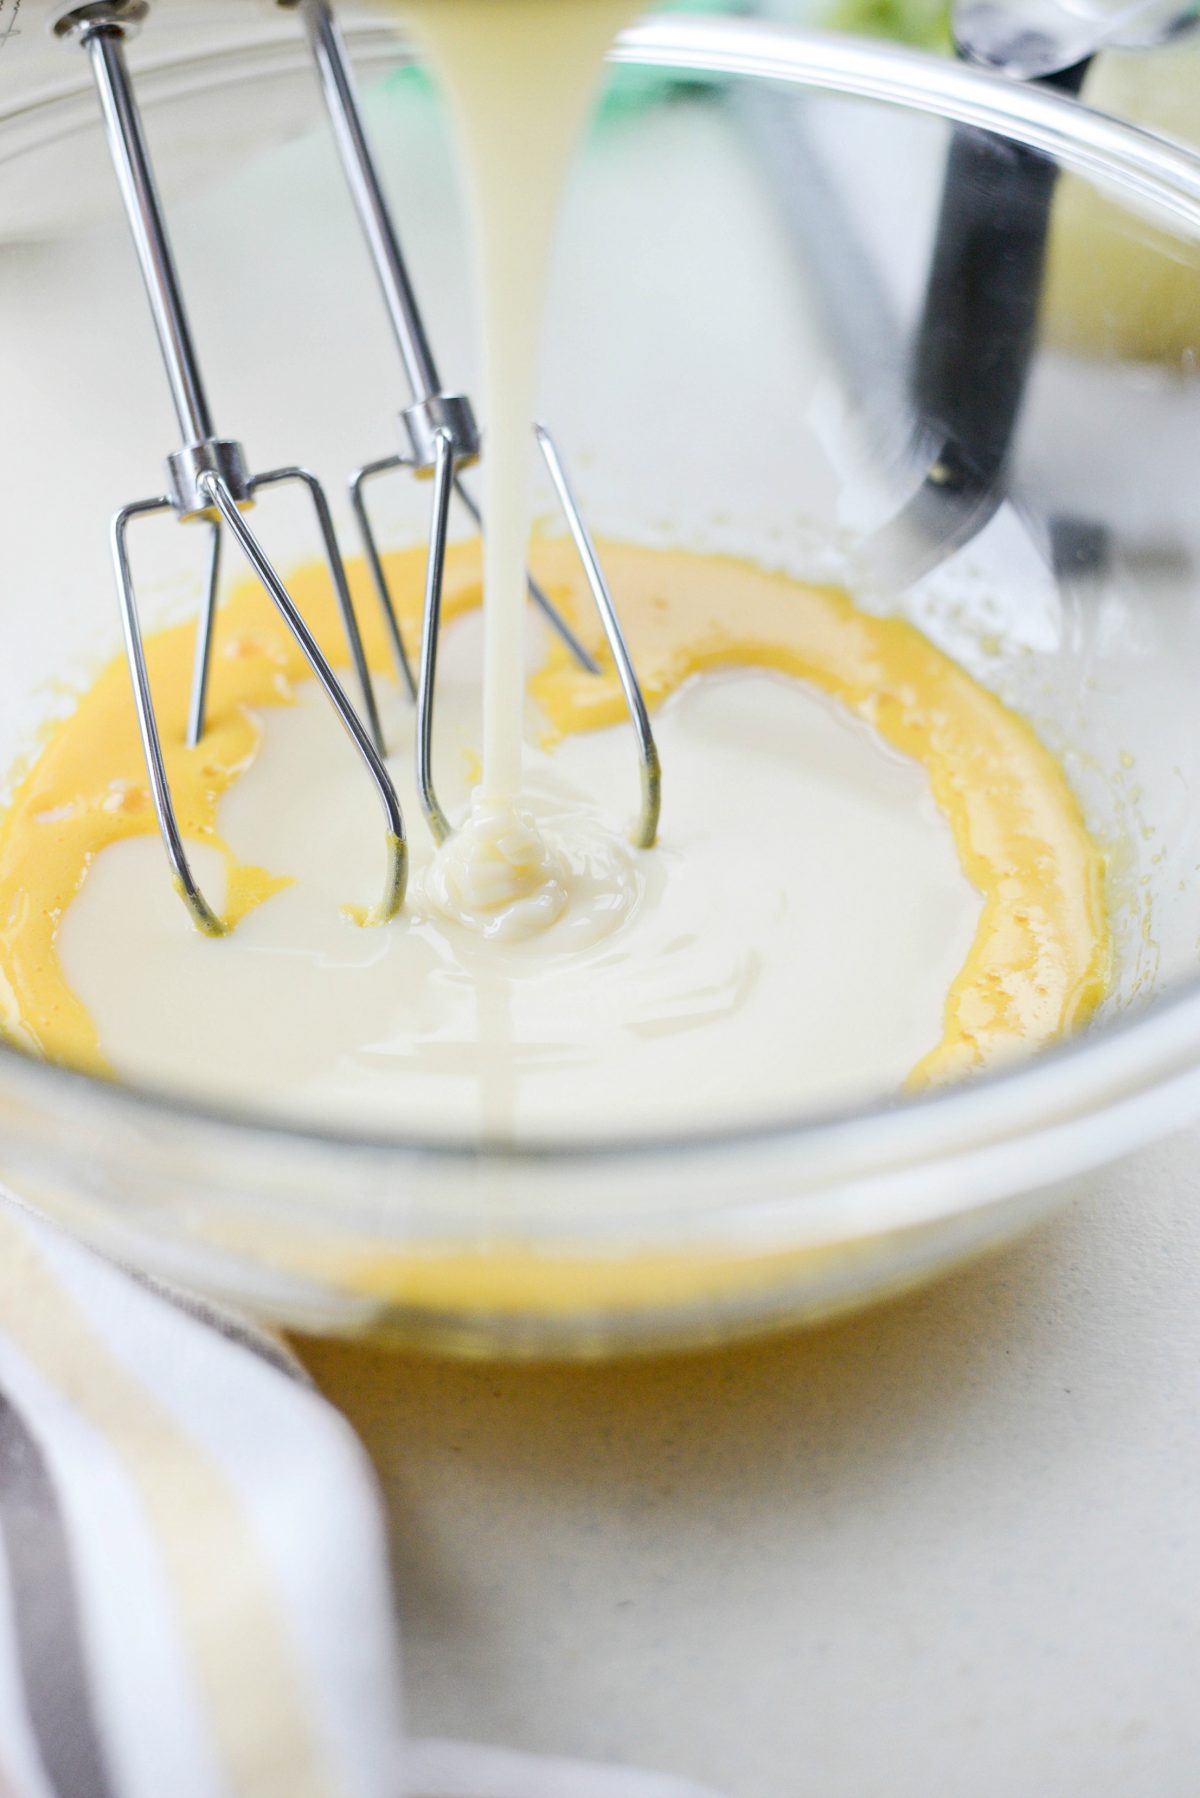 pour in sweetened condensed milk